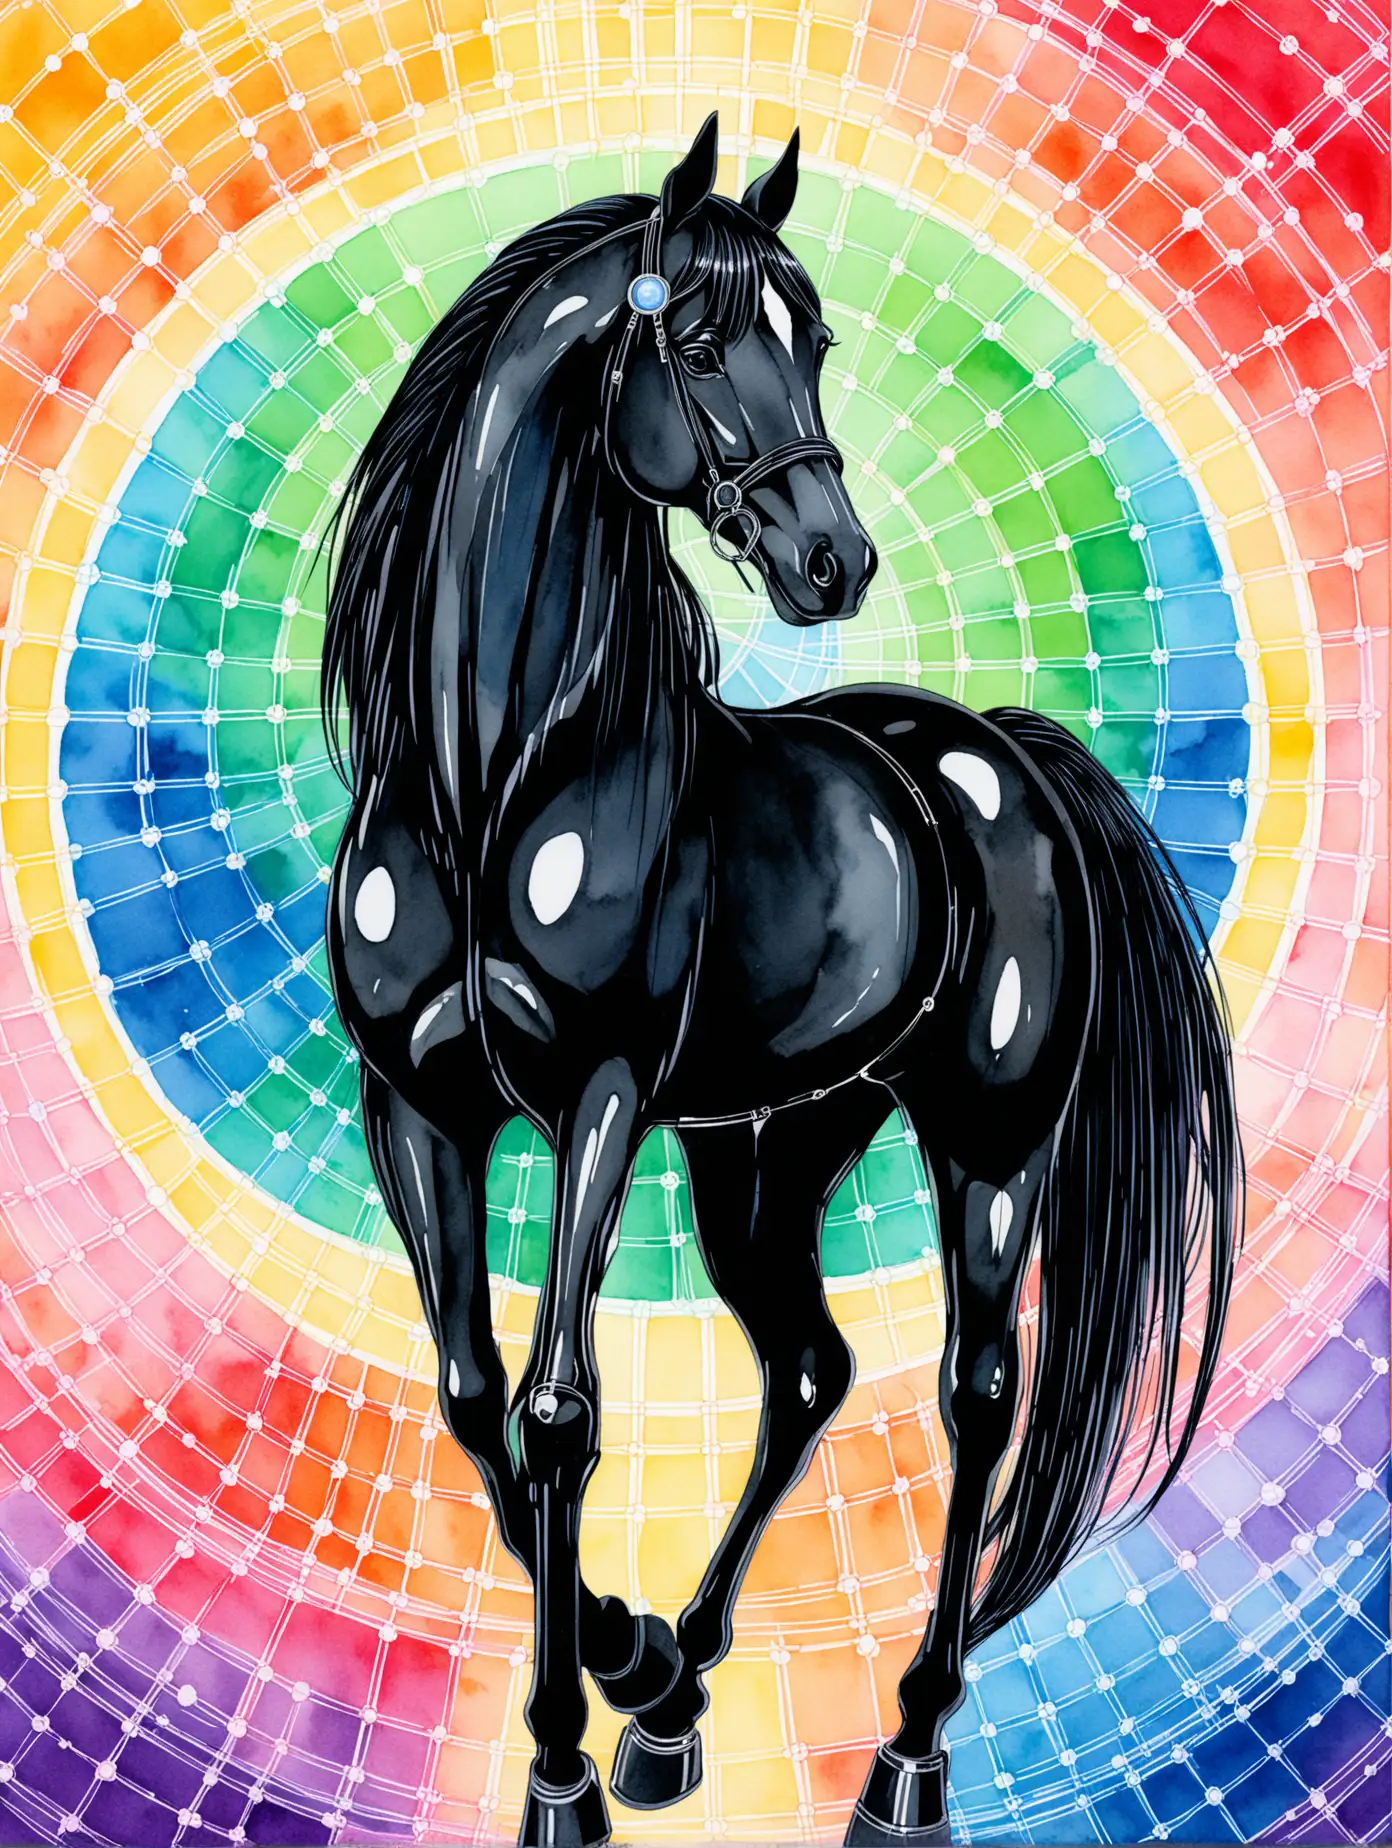 Futuristic Black Horse in Matrix Computer Theme Detailed and Vivid Watercolor Art Inspired by Hilma af Klint